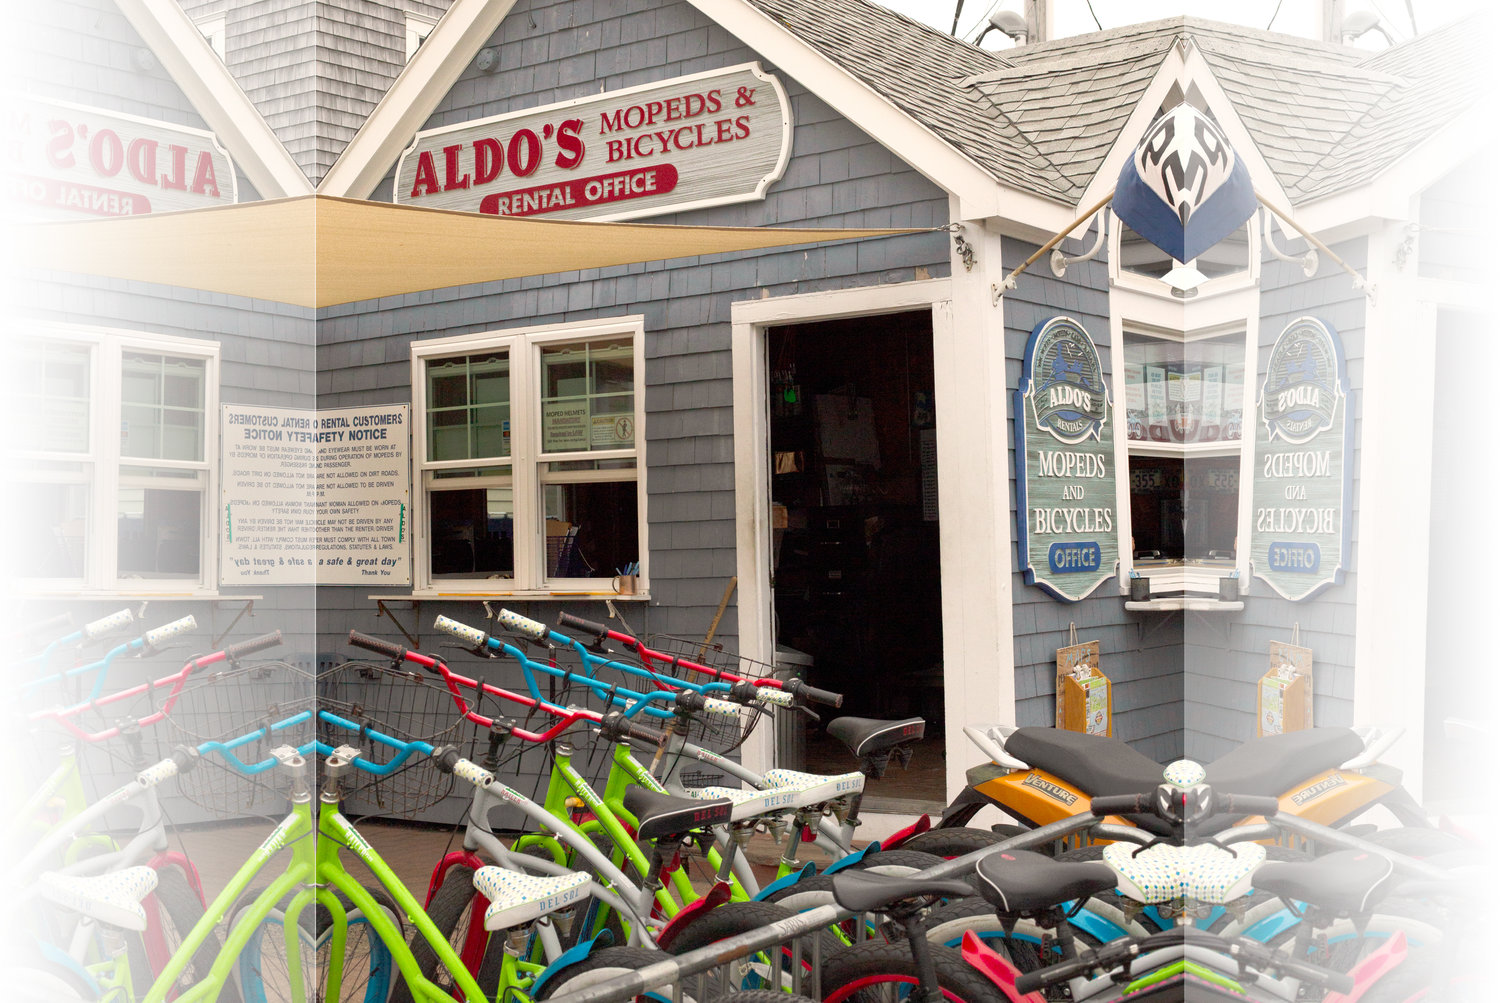 Stop at Aldo’s for a rental so you can explore the island on wheels